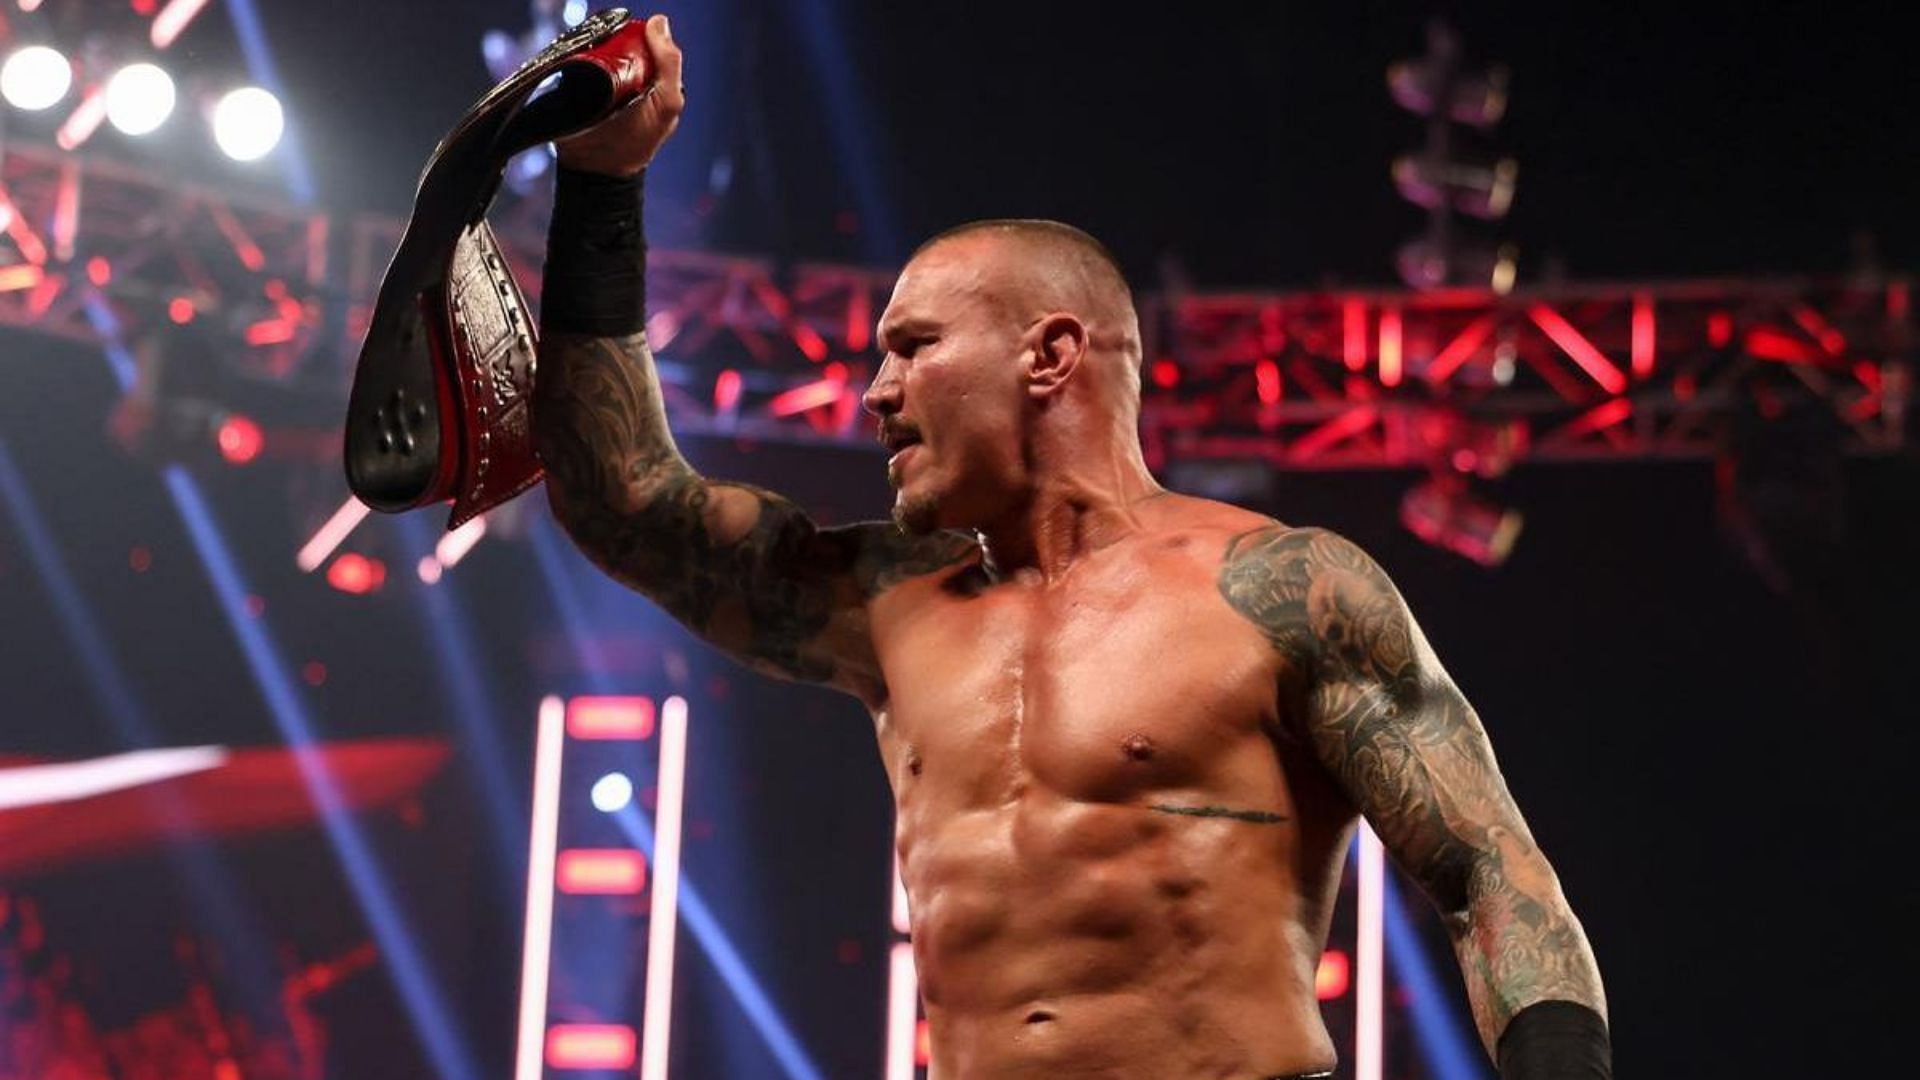 Randy Orton is currently one-half of the RAW Tag Team Champions.